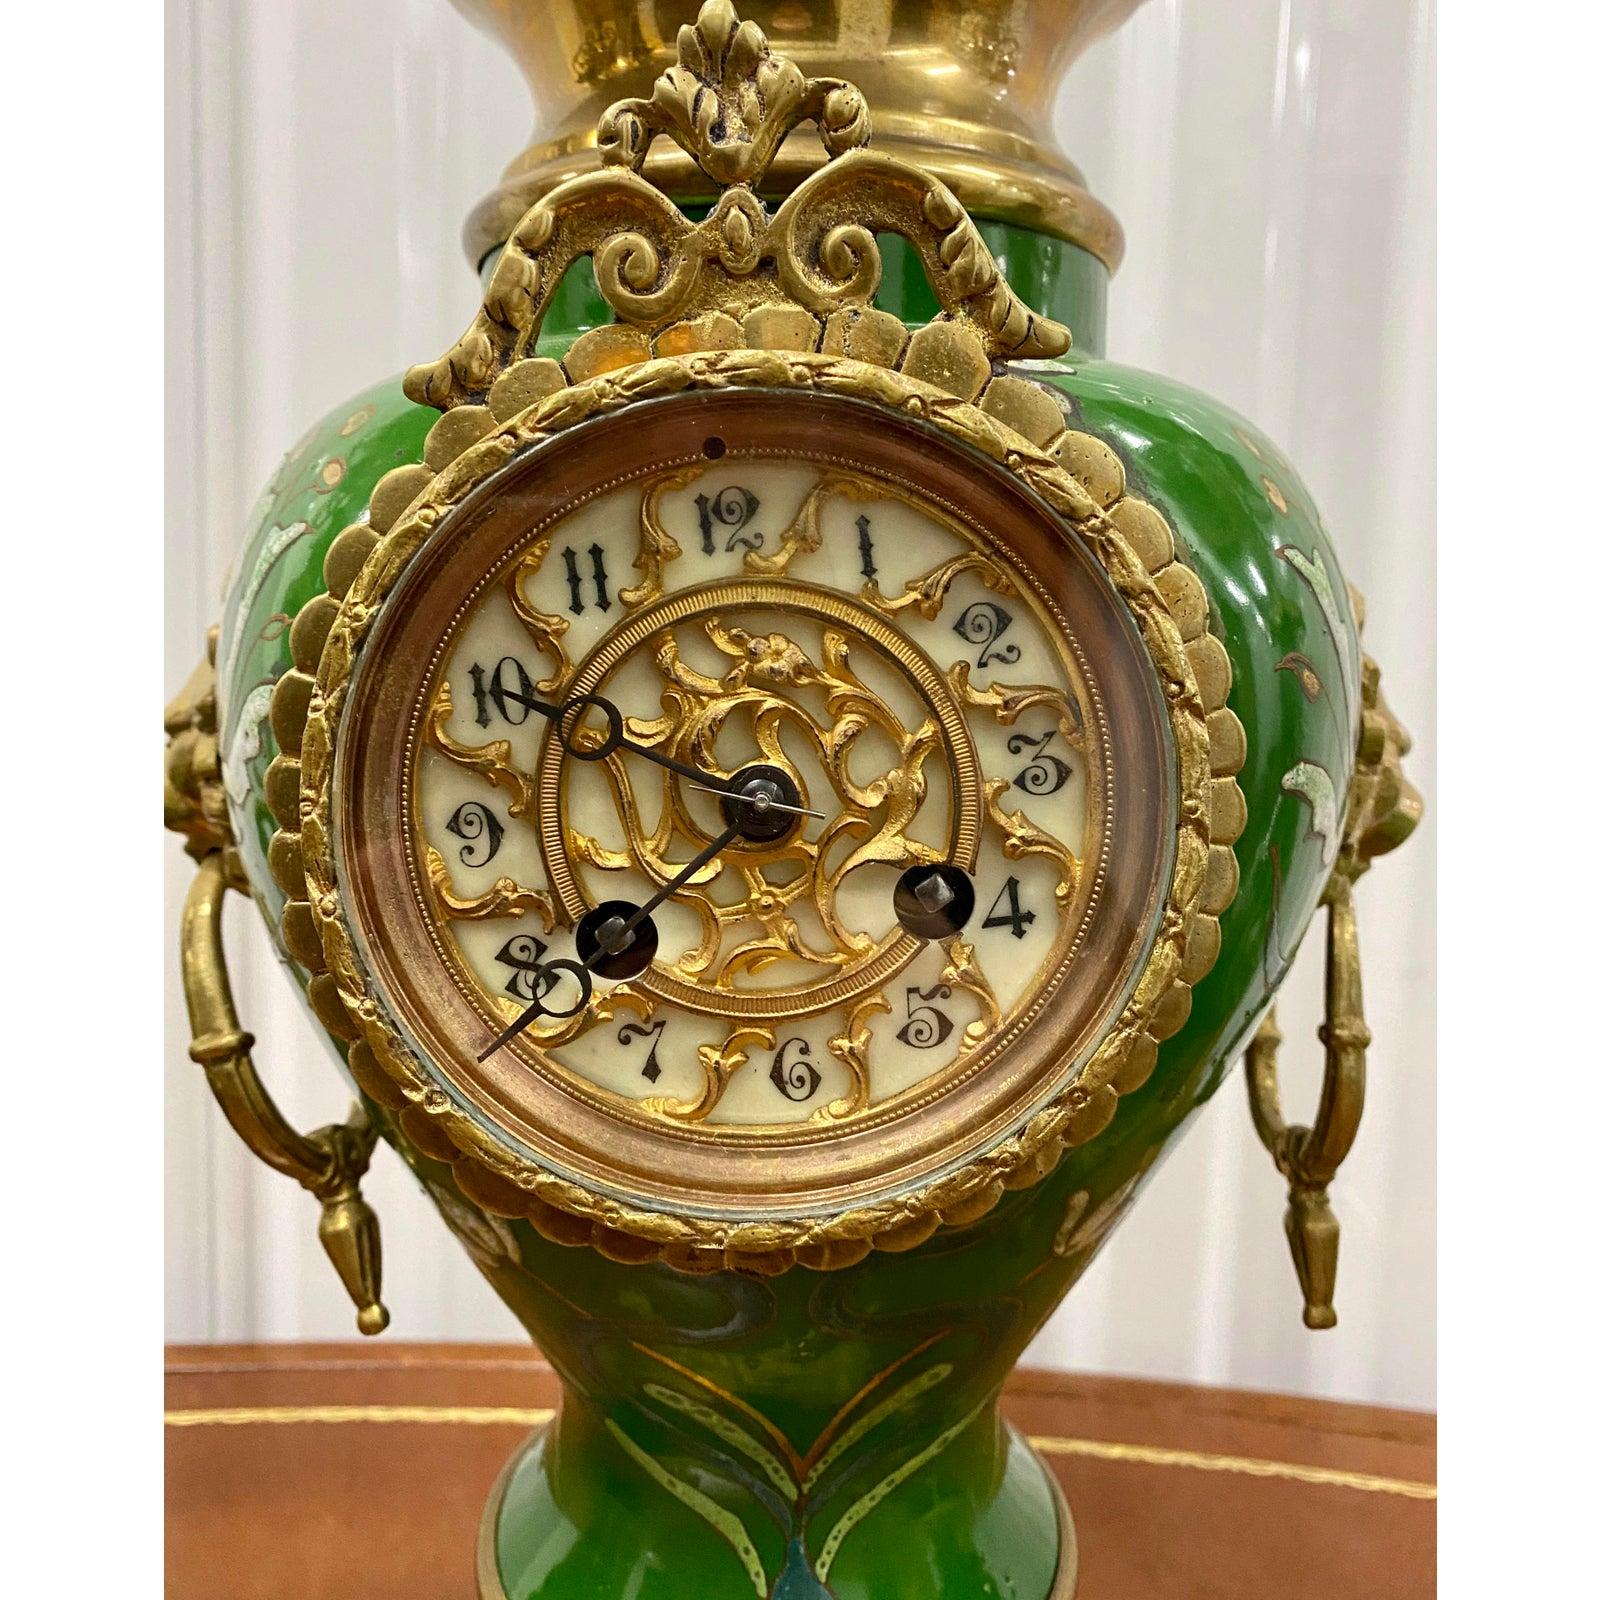 Vintage green enameled clock and candelabras, circa 1930

Gorgeous painted enamel clock with a pair of matching candelabras.

The clock measures: 7